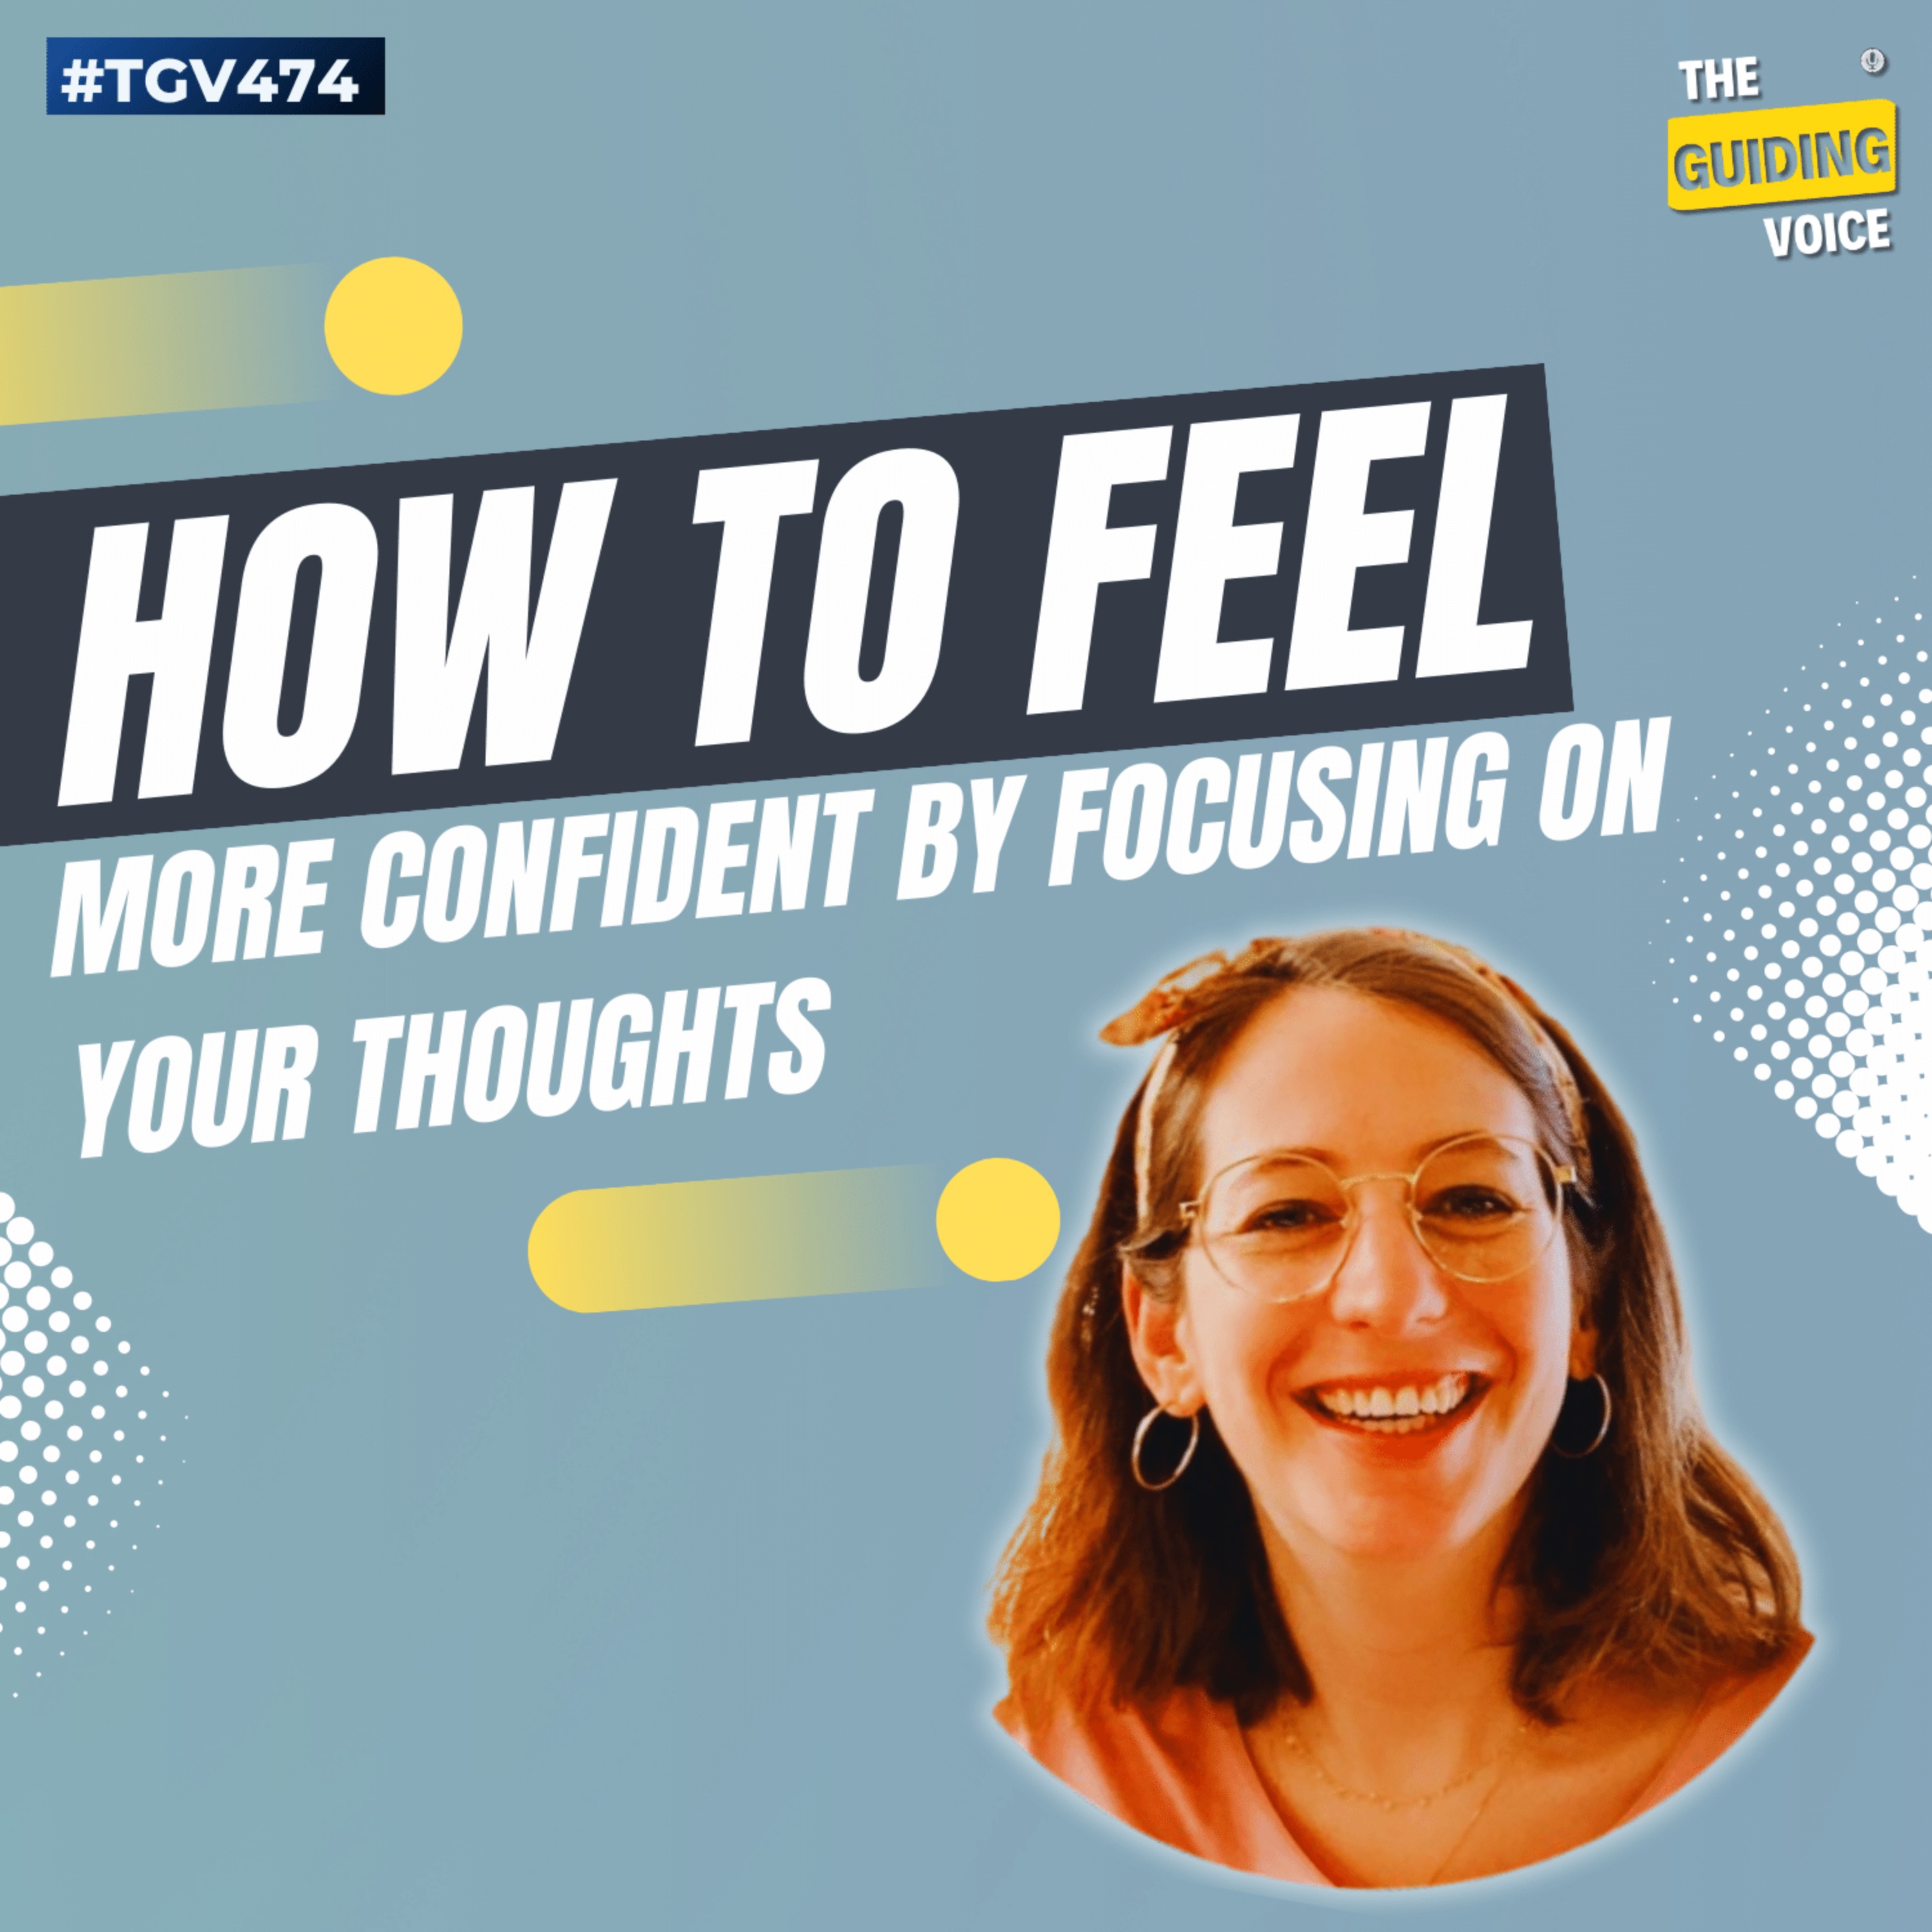 How to feel more confident by focusing on thoughts? | Tamara Pflug | #TGV474